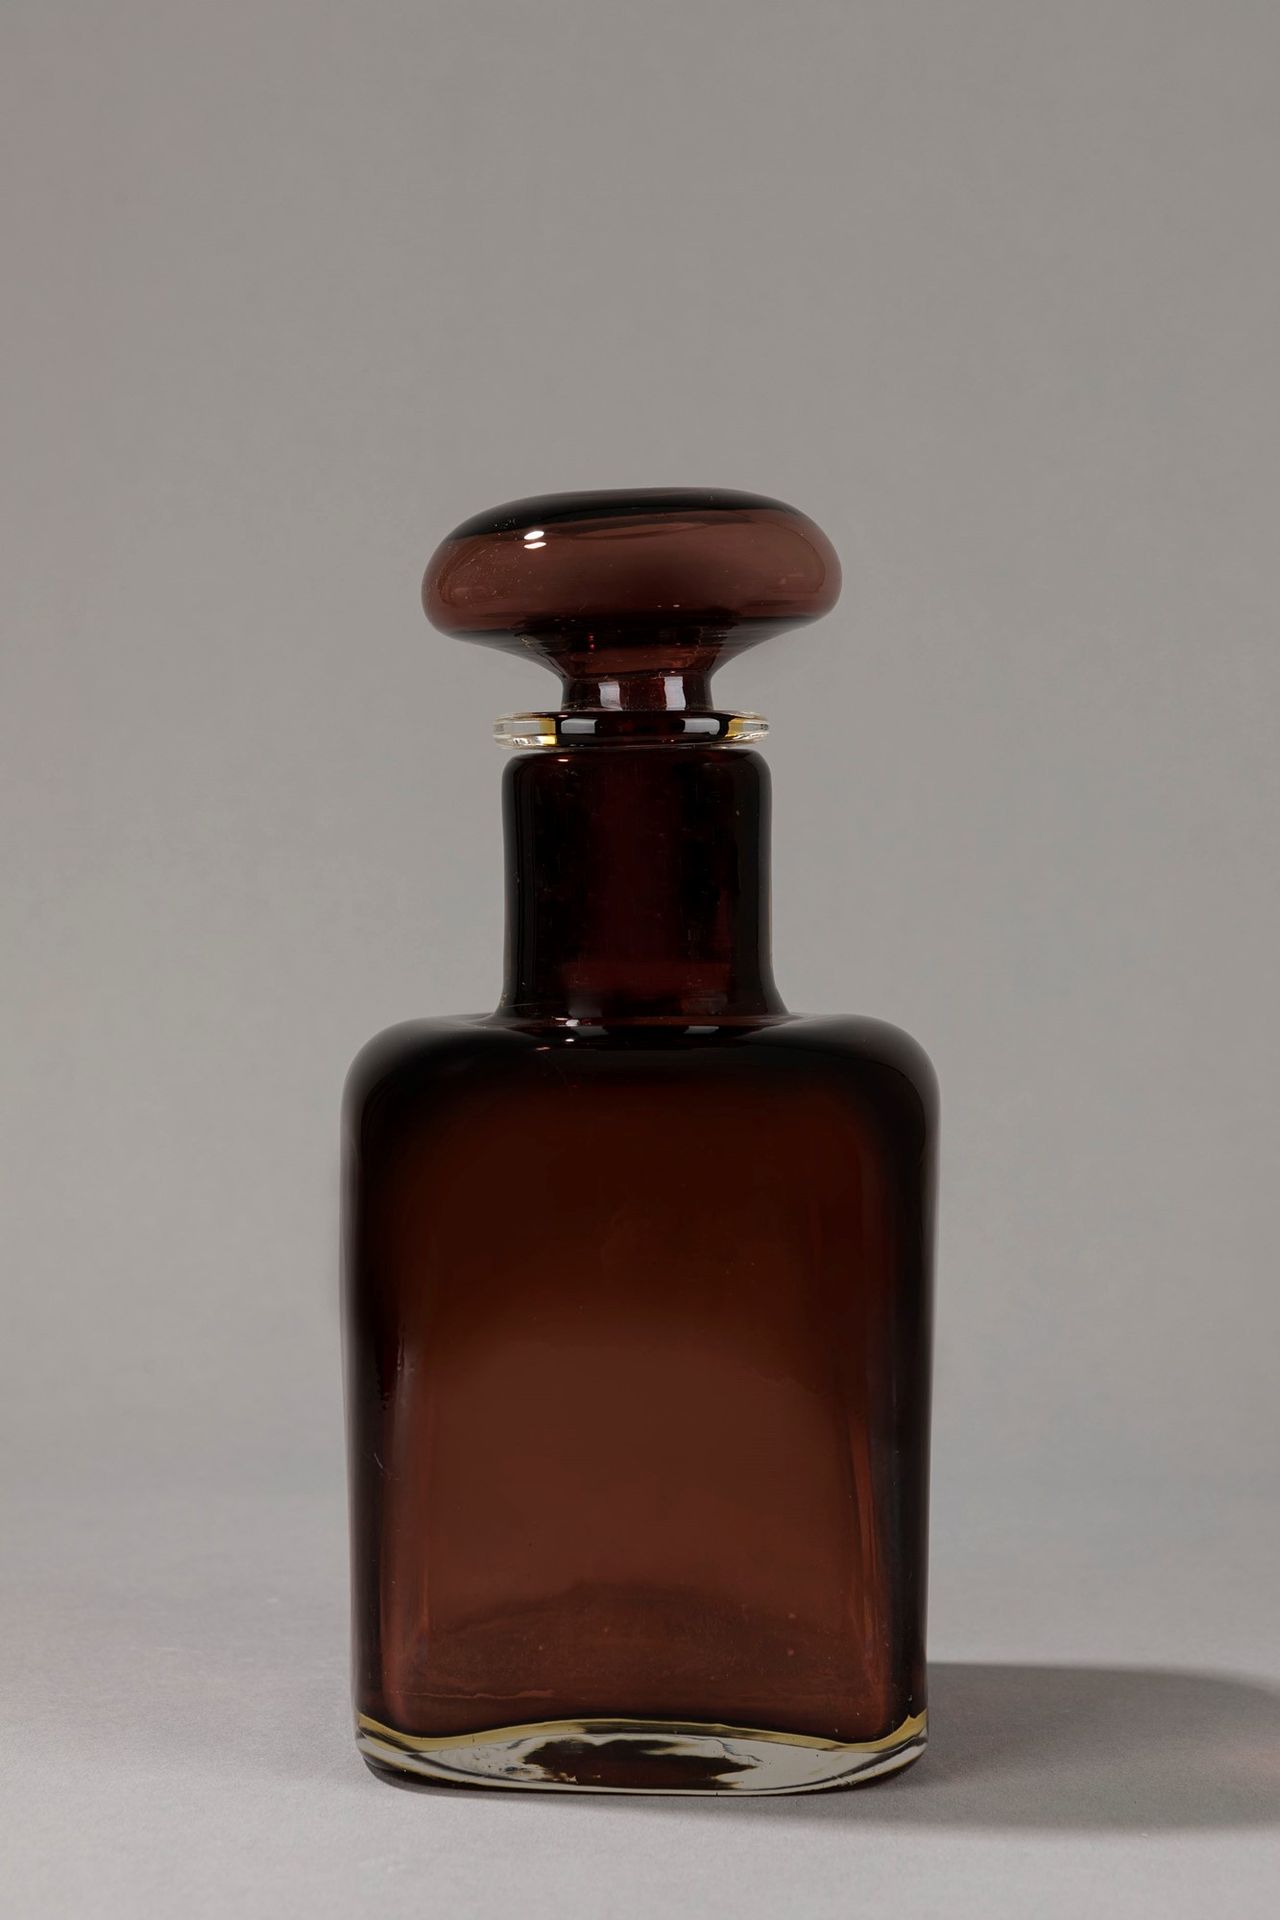 VENINI Bottle, 1950 ca.

H 24 x 11 x 11 cm
blown glass with cup.

Acyd sign